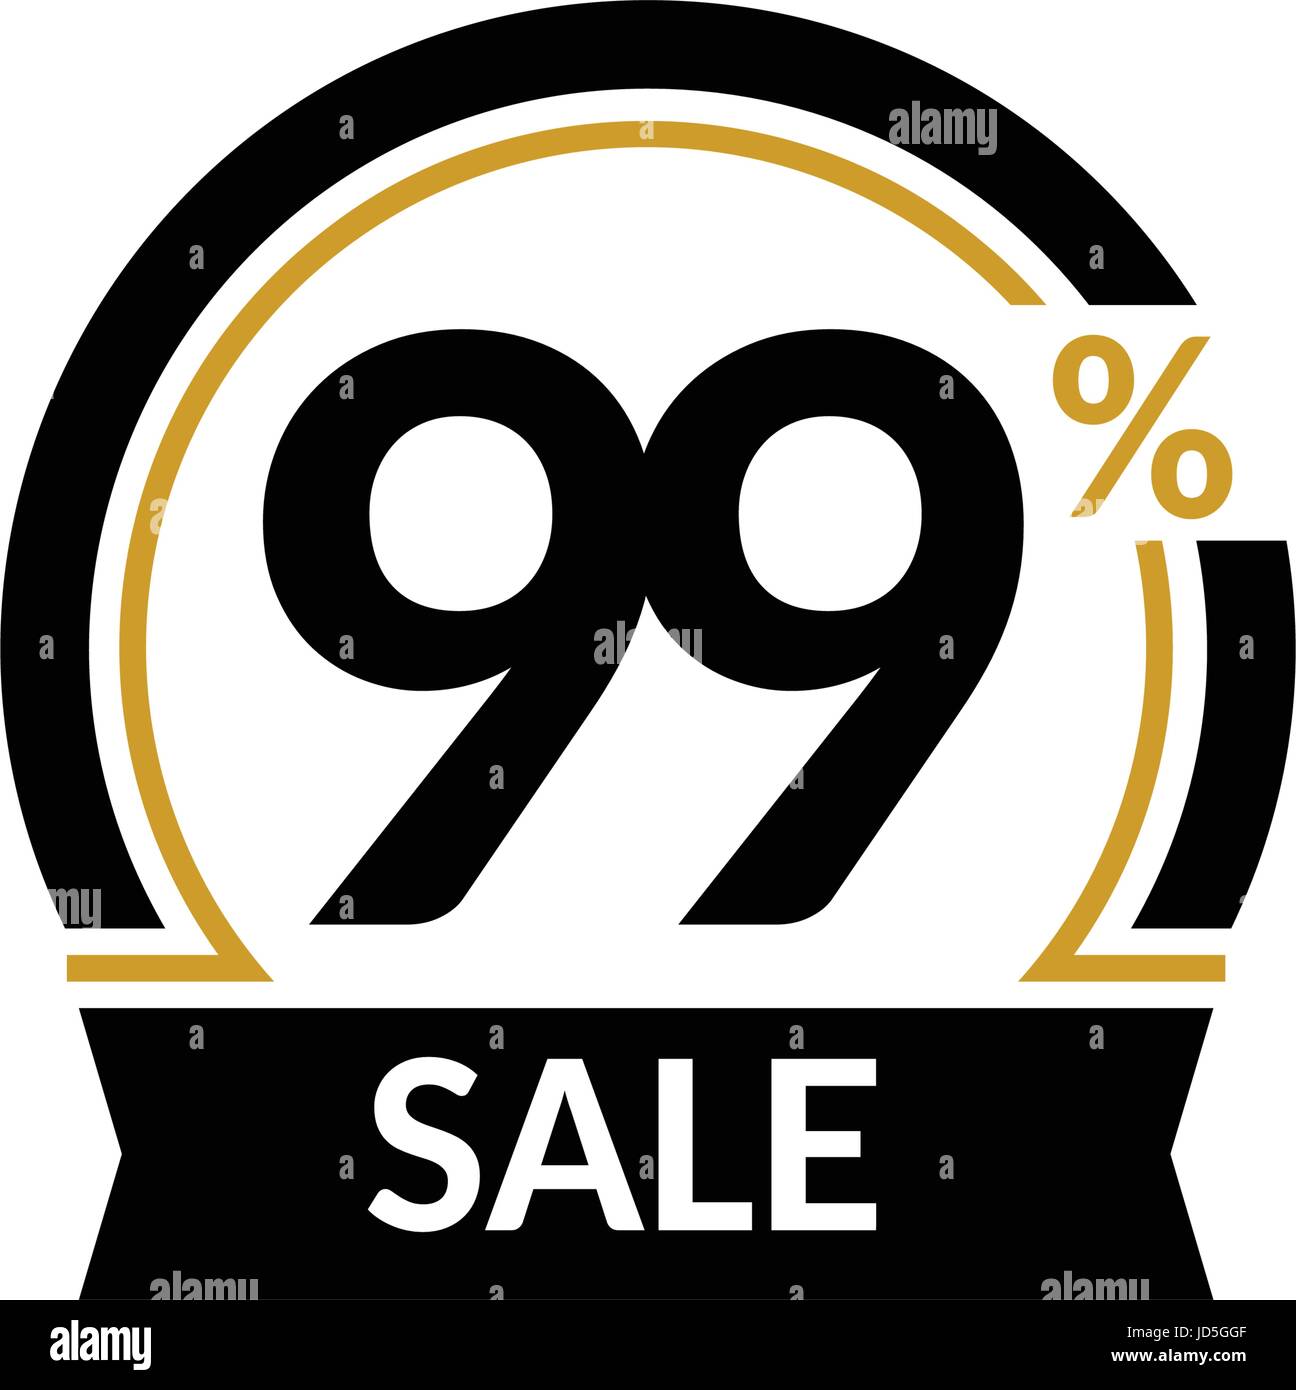 Discount card with 99 percent sale. Advertising Sale vector isolated sign. Promotion Stylish logo design under the black and gold arch Stock Vector